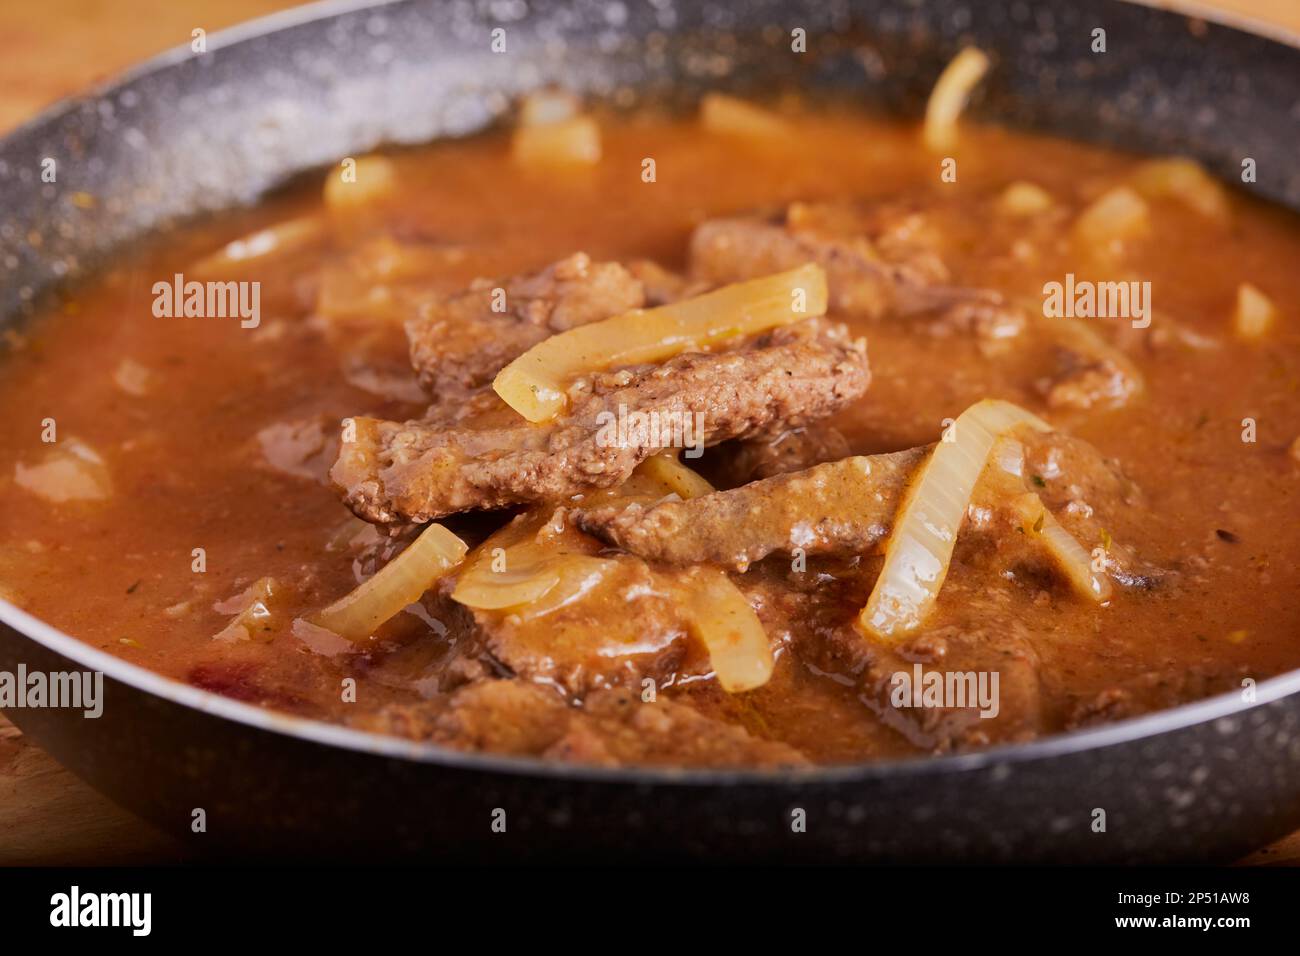 Liver and onions in gravy resting in a pan. Stock Photo